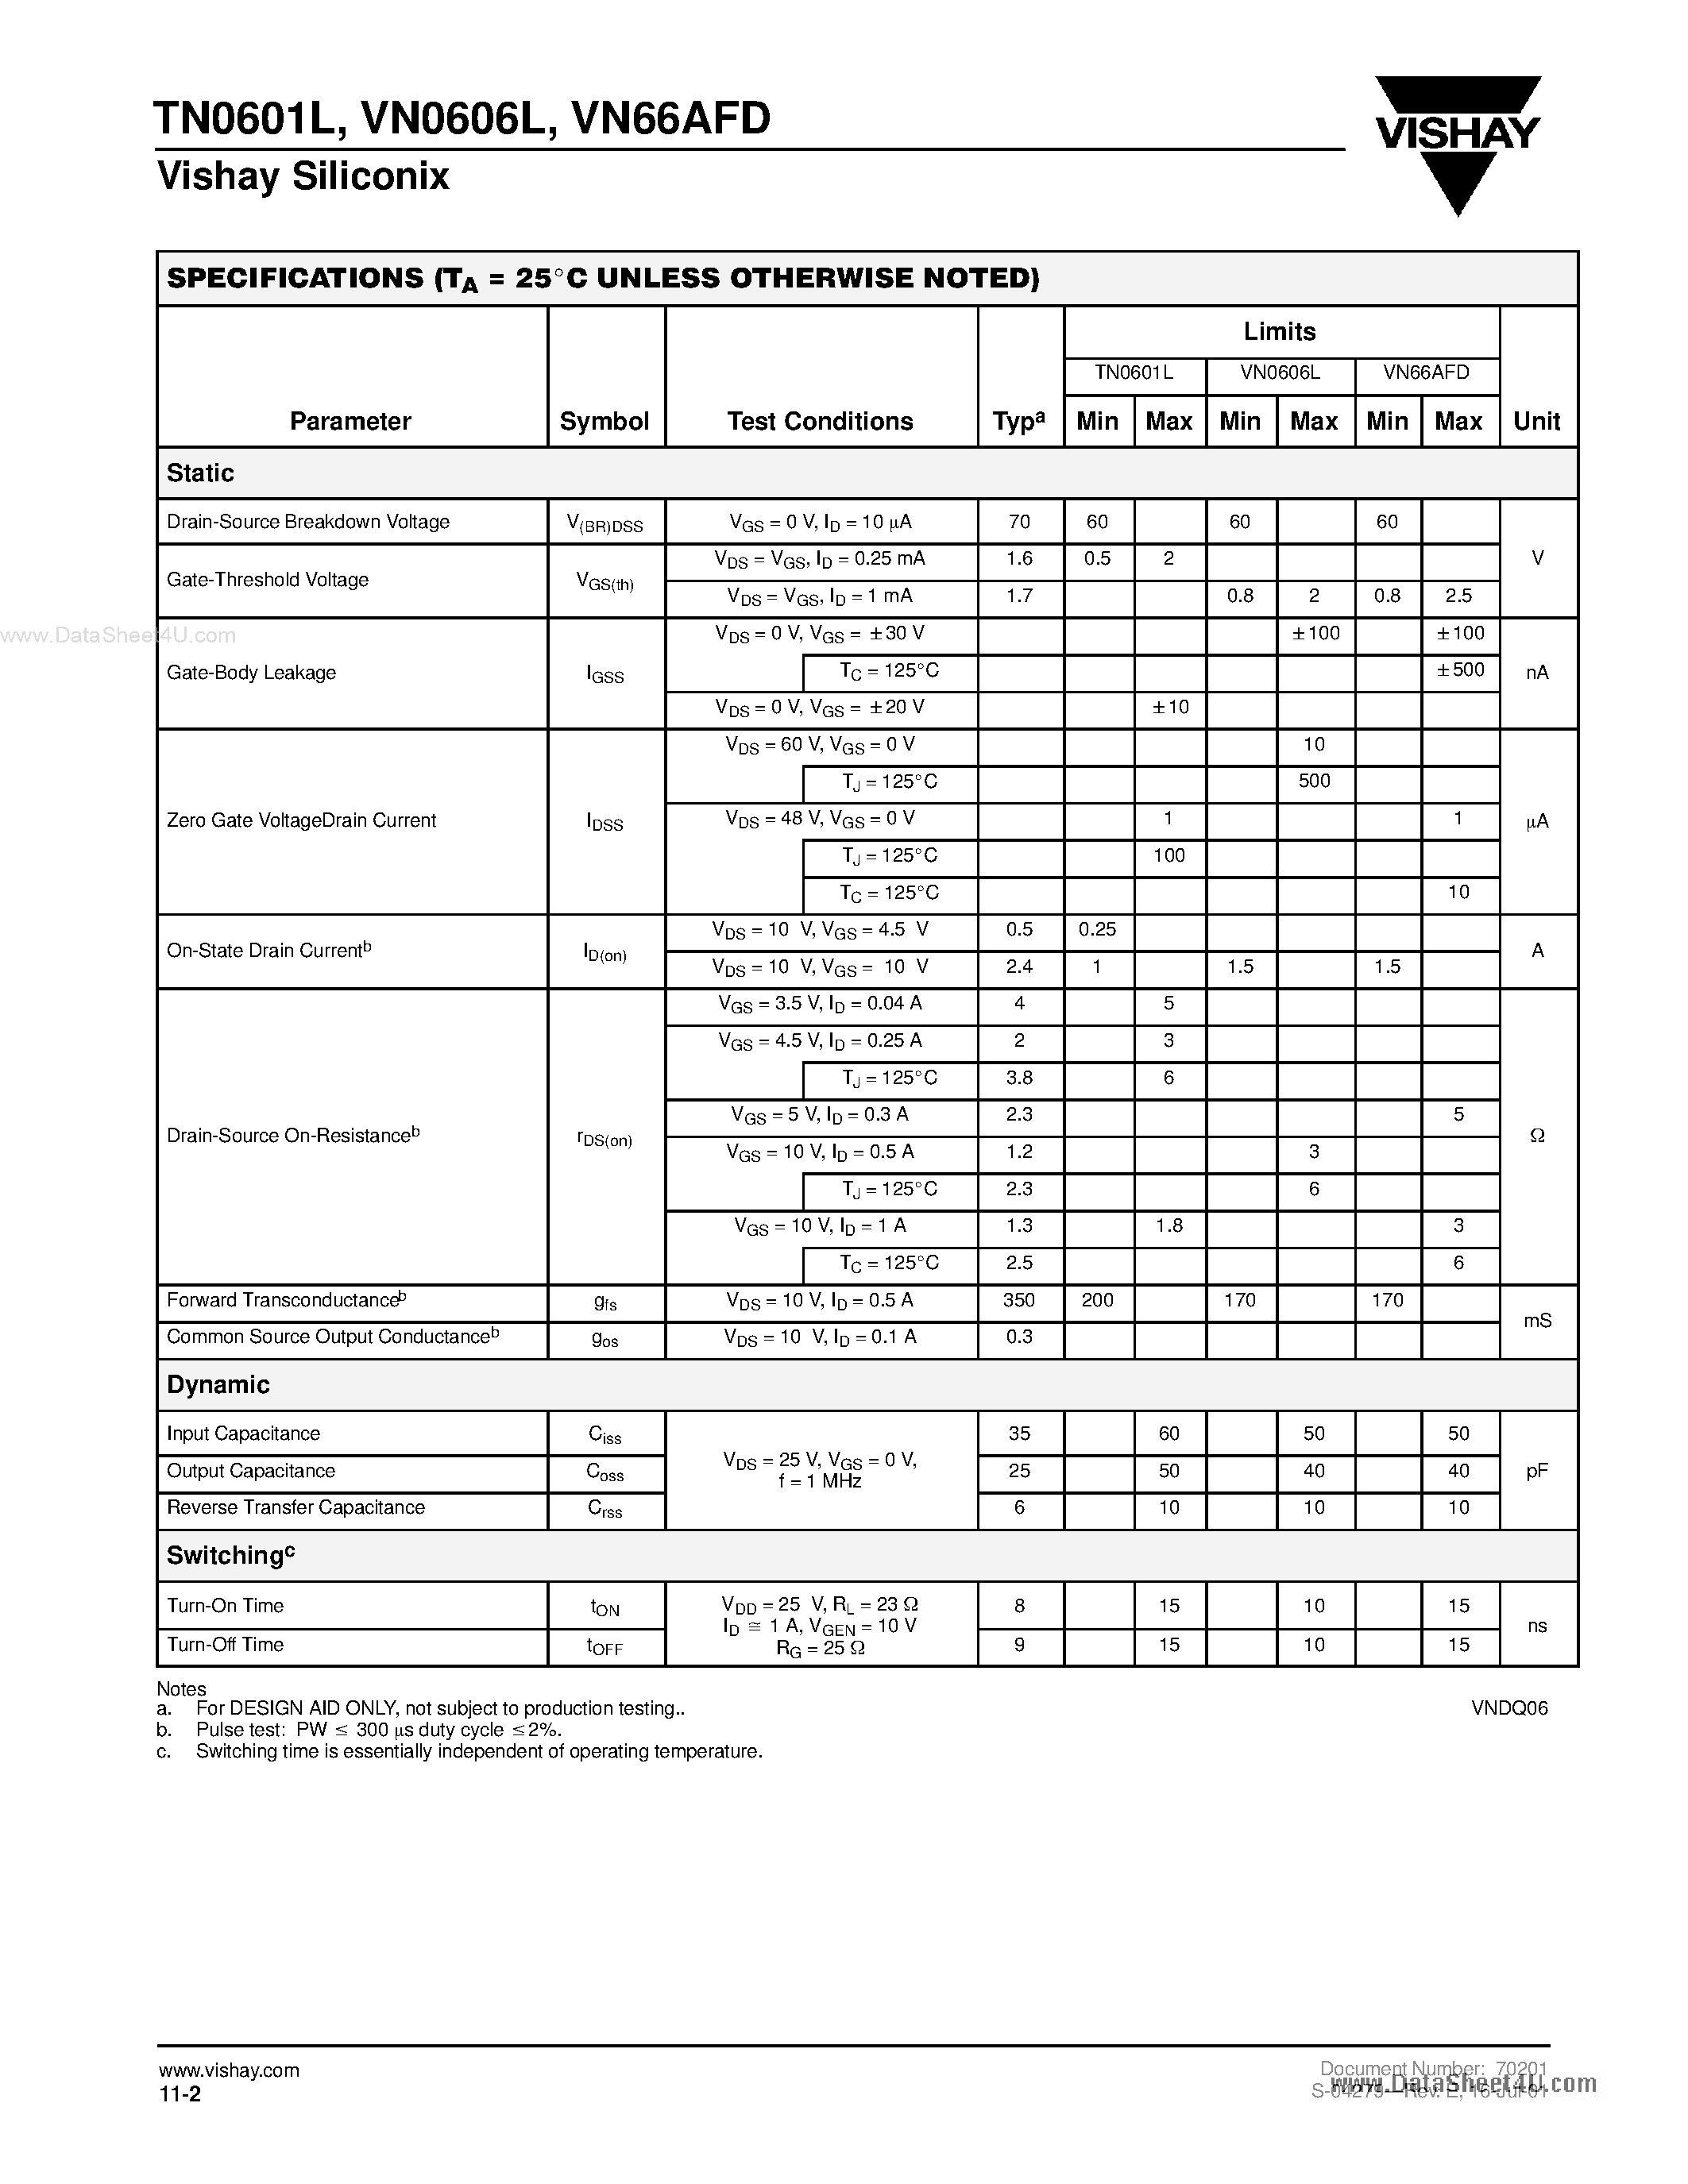 Datasheet VN66AFD - N-Channel 60-V (D-S) MOSFETs page 2